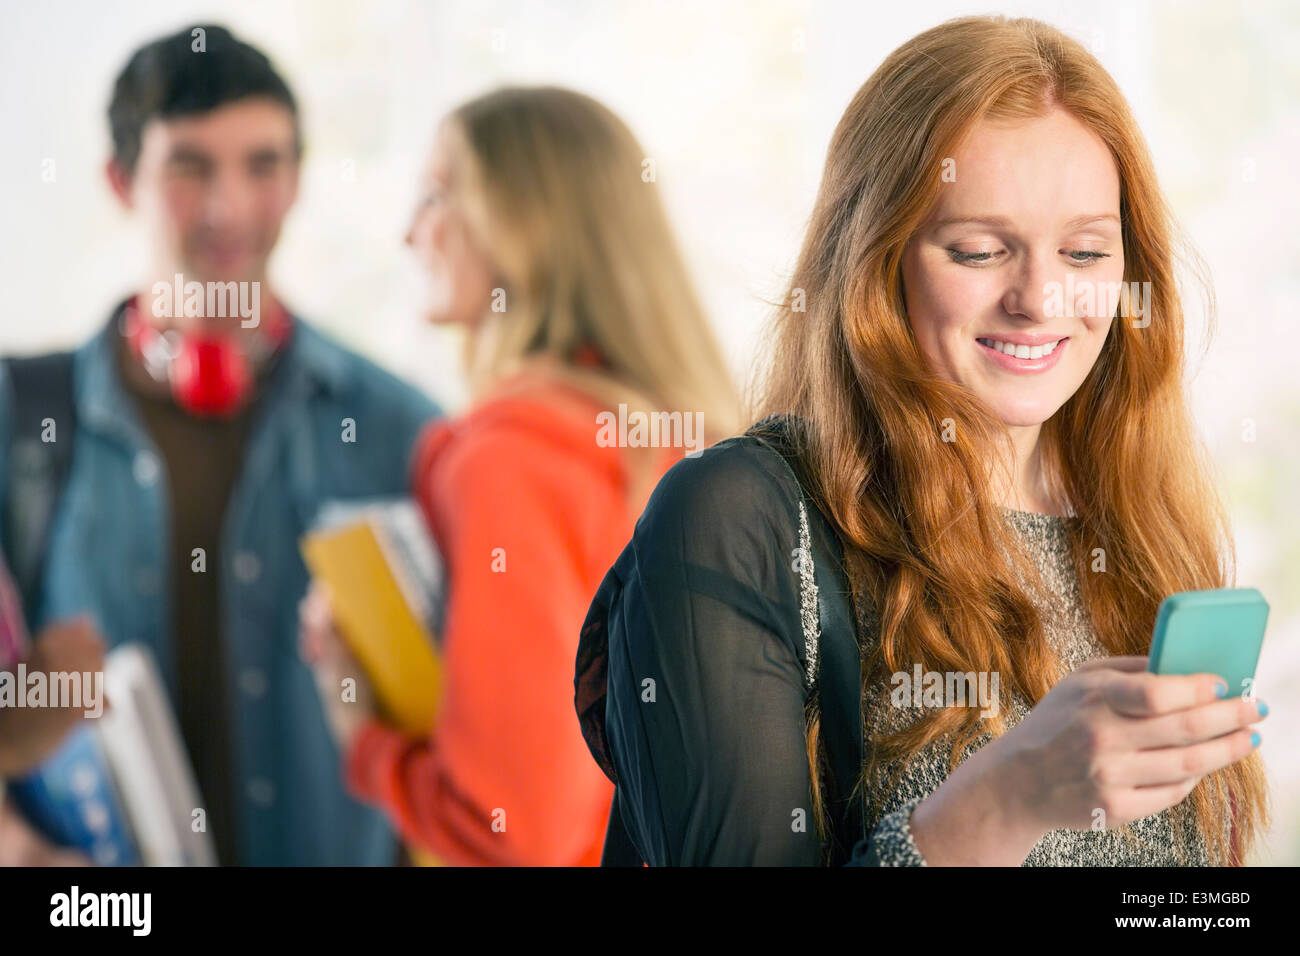 College student text messaging with cell phone Stock Photo